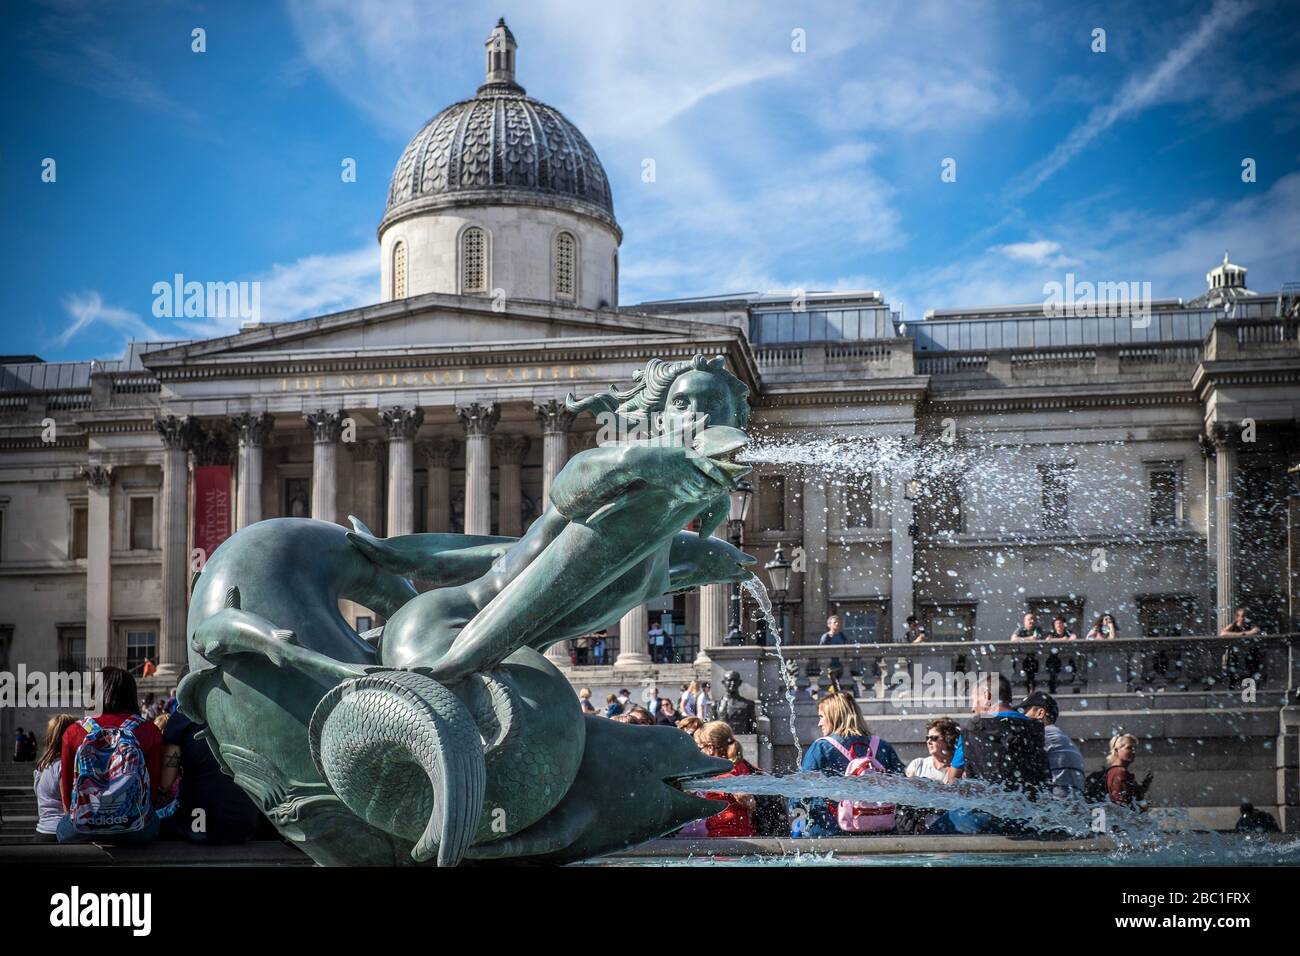 FOUNTAIN ON TRAFALGAR SQUARE IN FRONT OF THE NATIONAL GALLERY, LONDON, GREAT BRITAIN, EUROPE Stock Photo